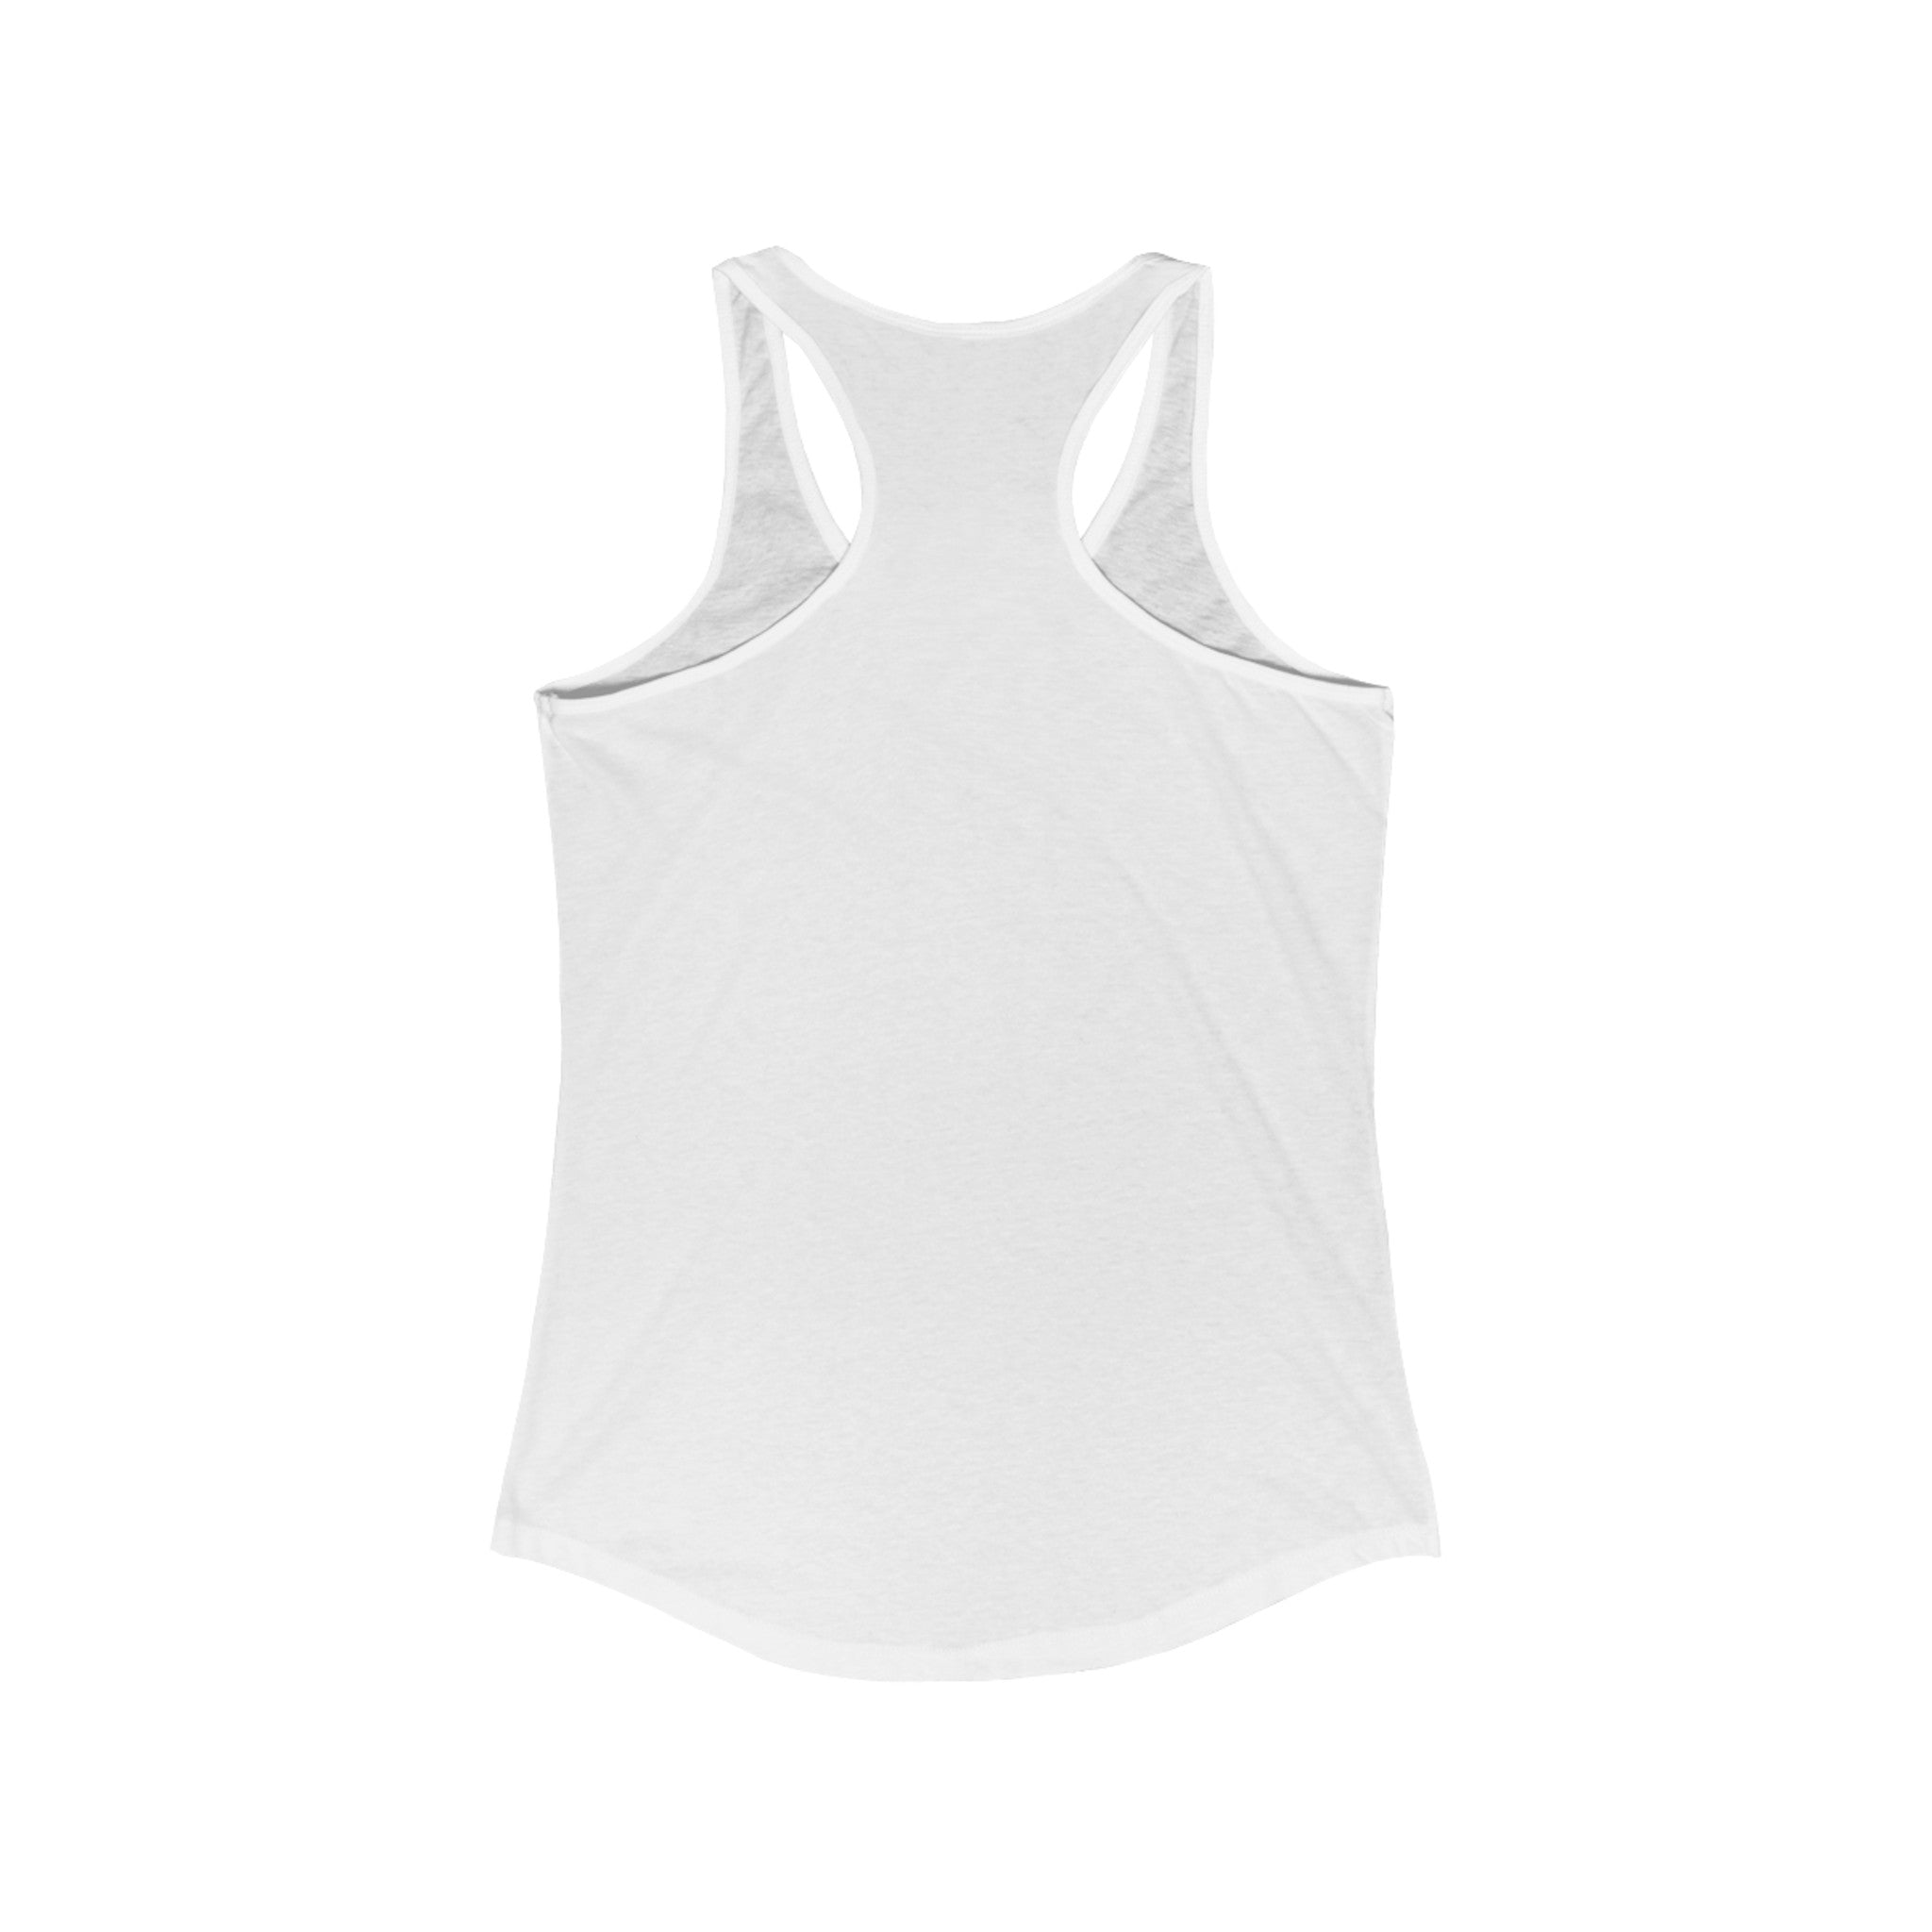 Ge-Ni-U-S - Women's Racerback Tank viewed from the back, showcasing its simple design with no visible logos or patterns—an essential lightweight piece perfect for an active lifestyle.